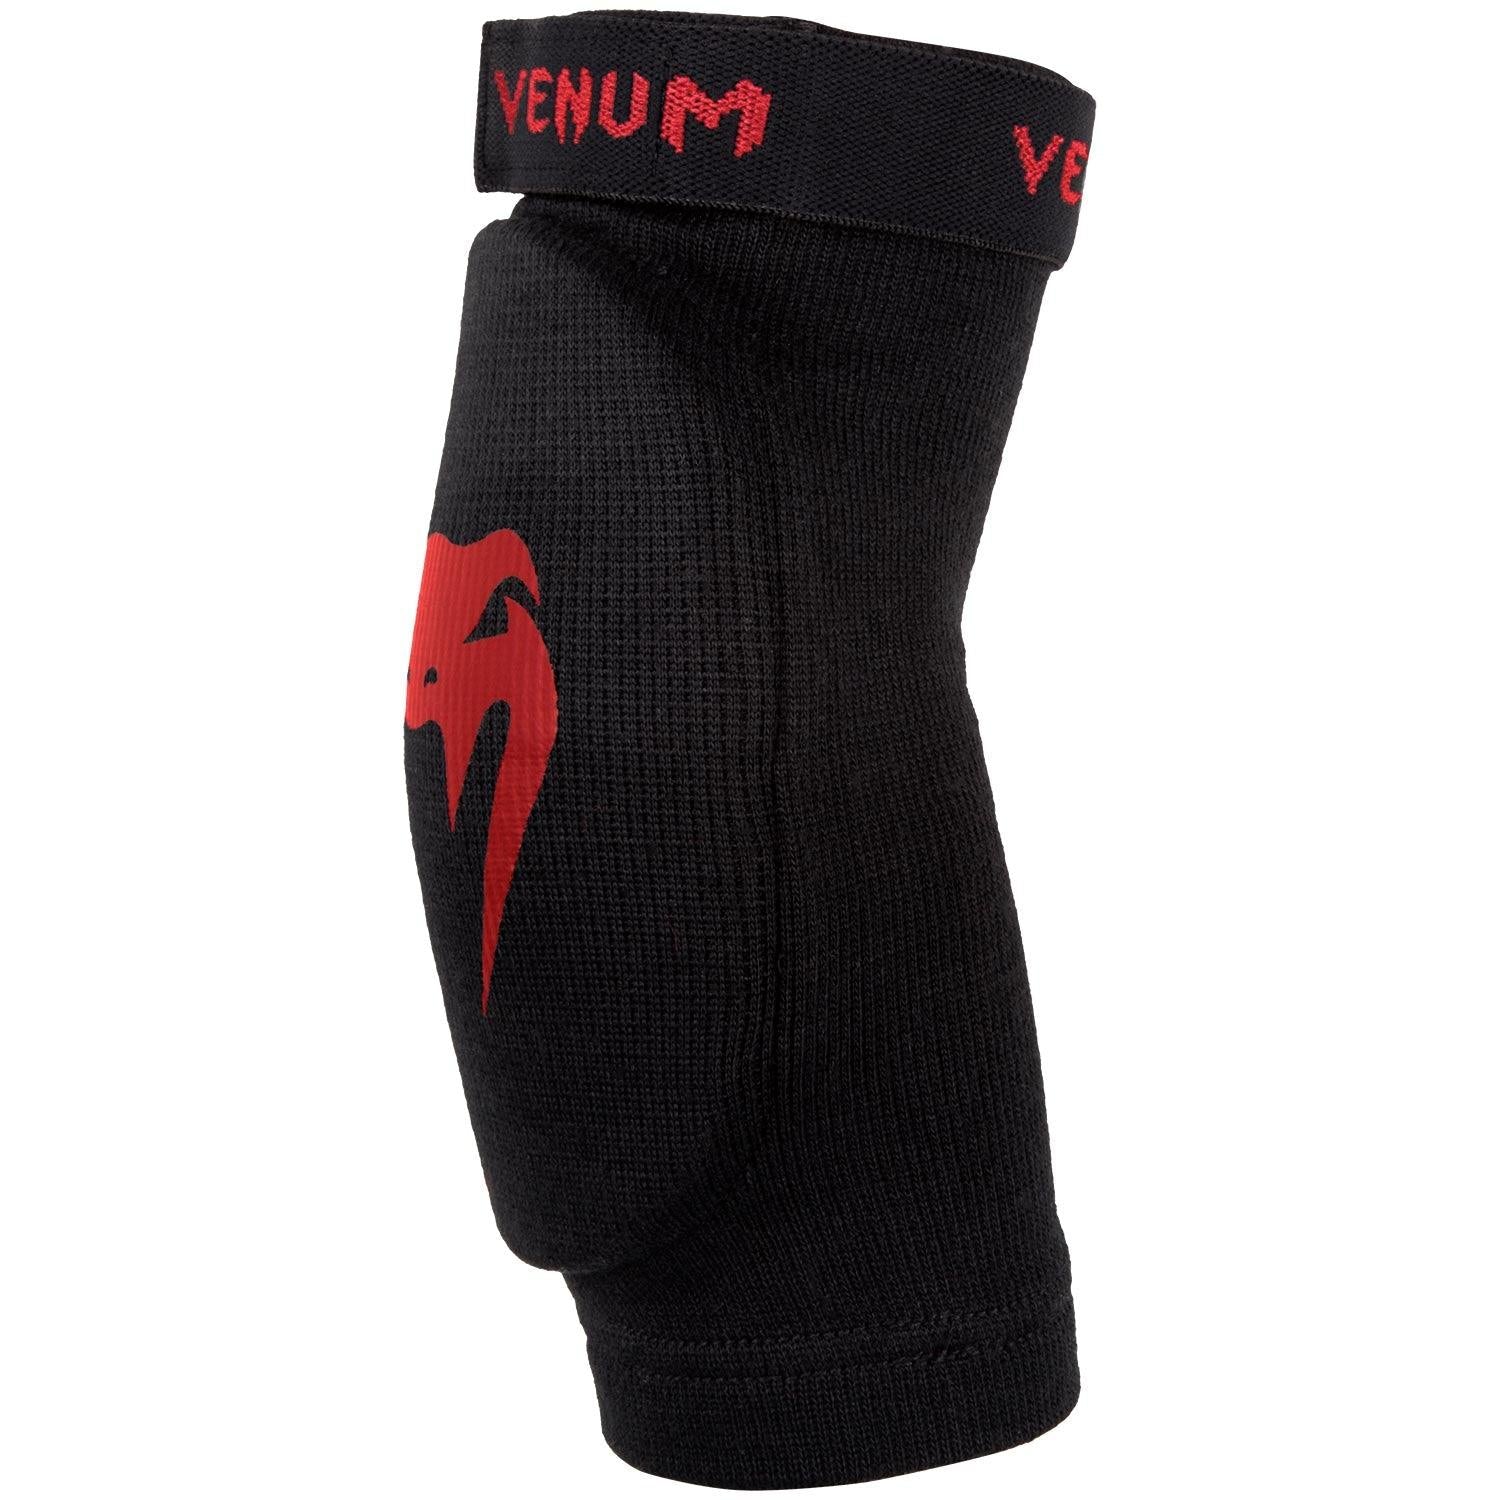 Venum Kontact Elbow Pads - Black/Red Picture 2